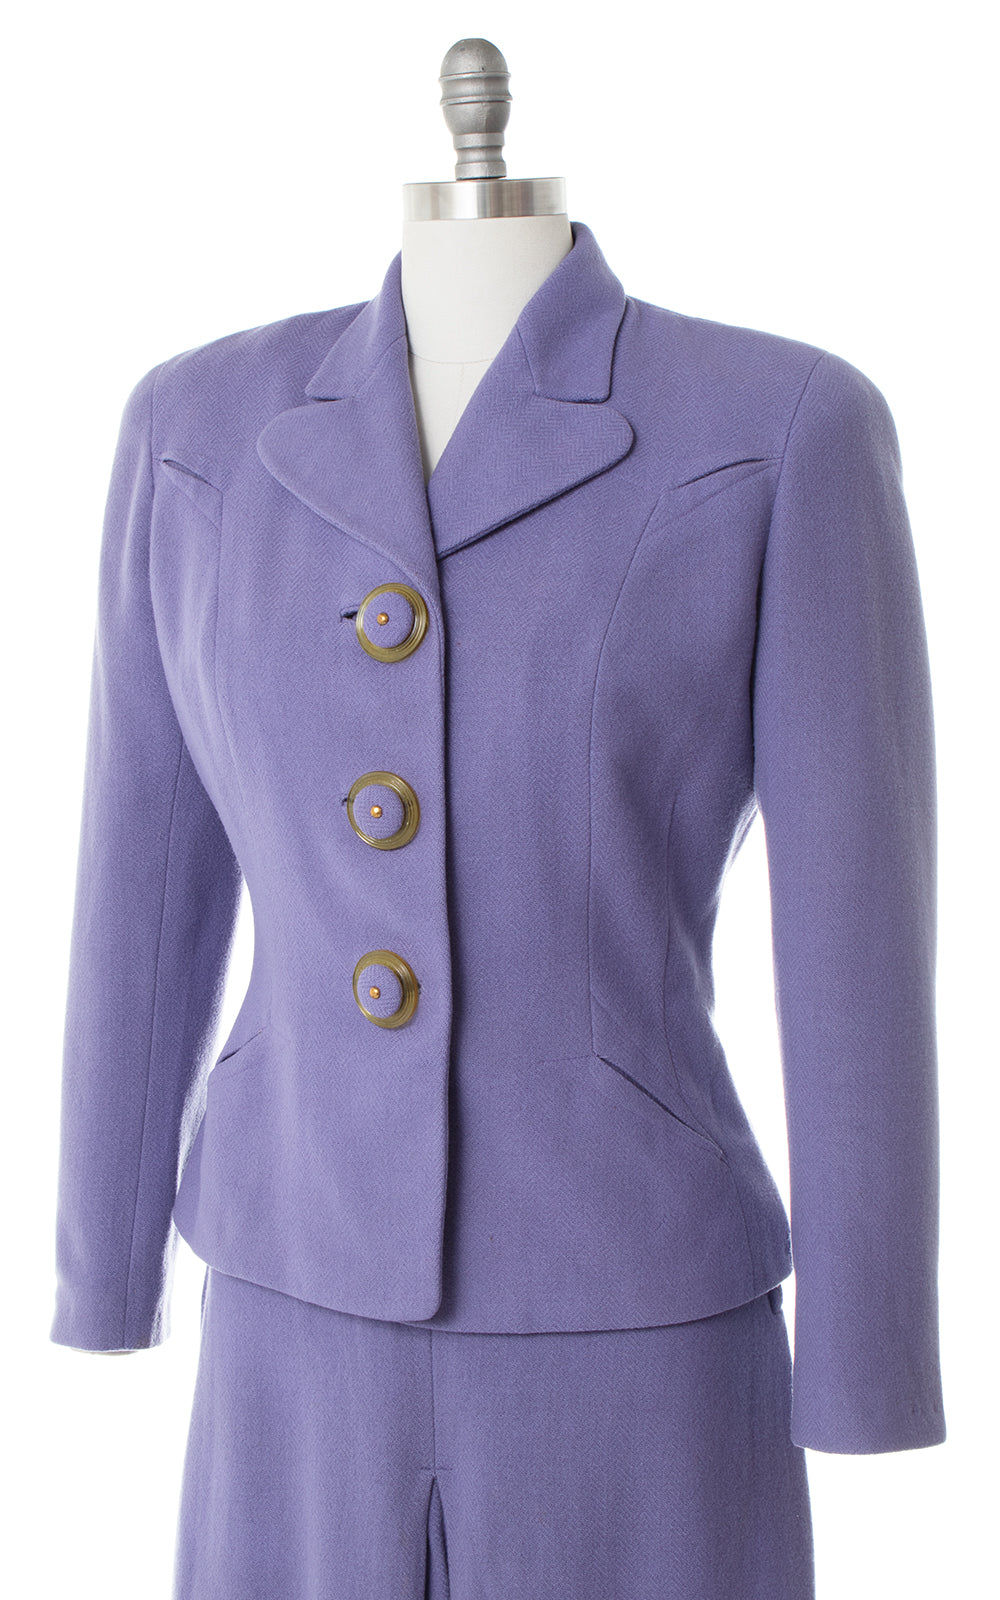 1940s Lavender Wool Skirt Suit with Celluloid Buttons